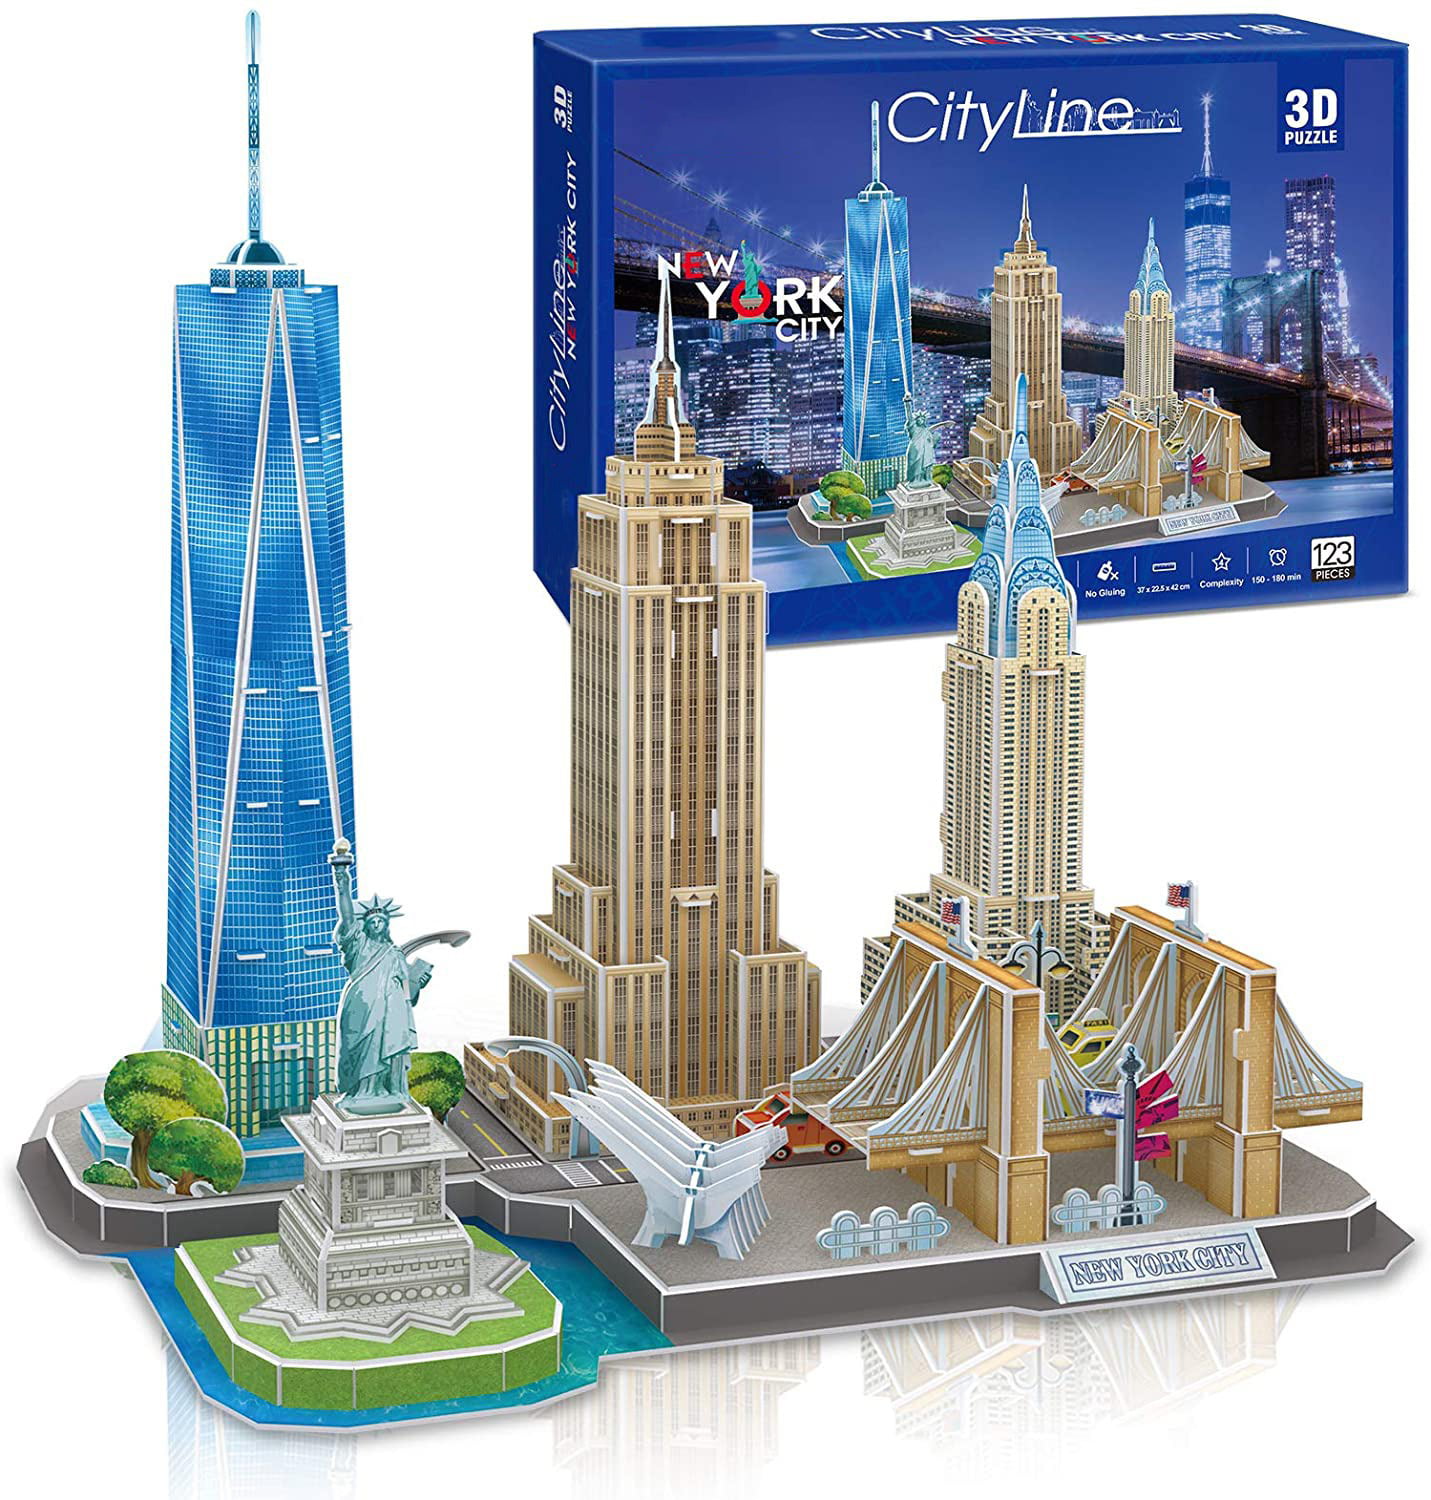 Barka Ave 3D Puzzle New York Architecture Building Model Kits, Statue of Liberty, Empire State Building, Brooklyn Bridge, Chrysler Building 3D Puzzles for Adults and Children, 123 Pieces(New York